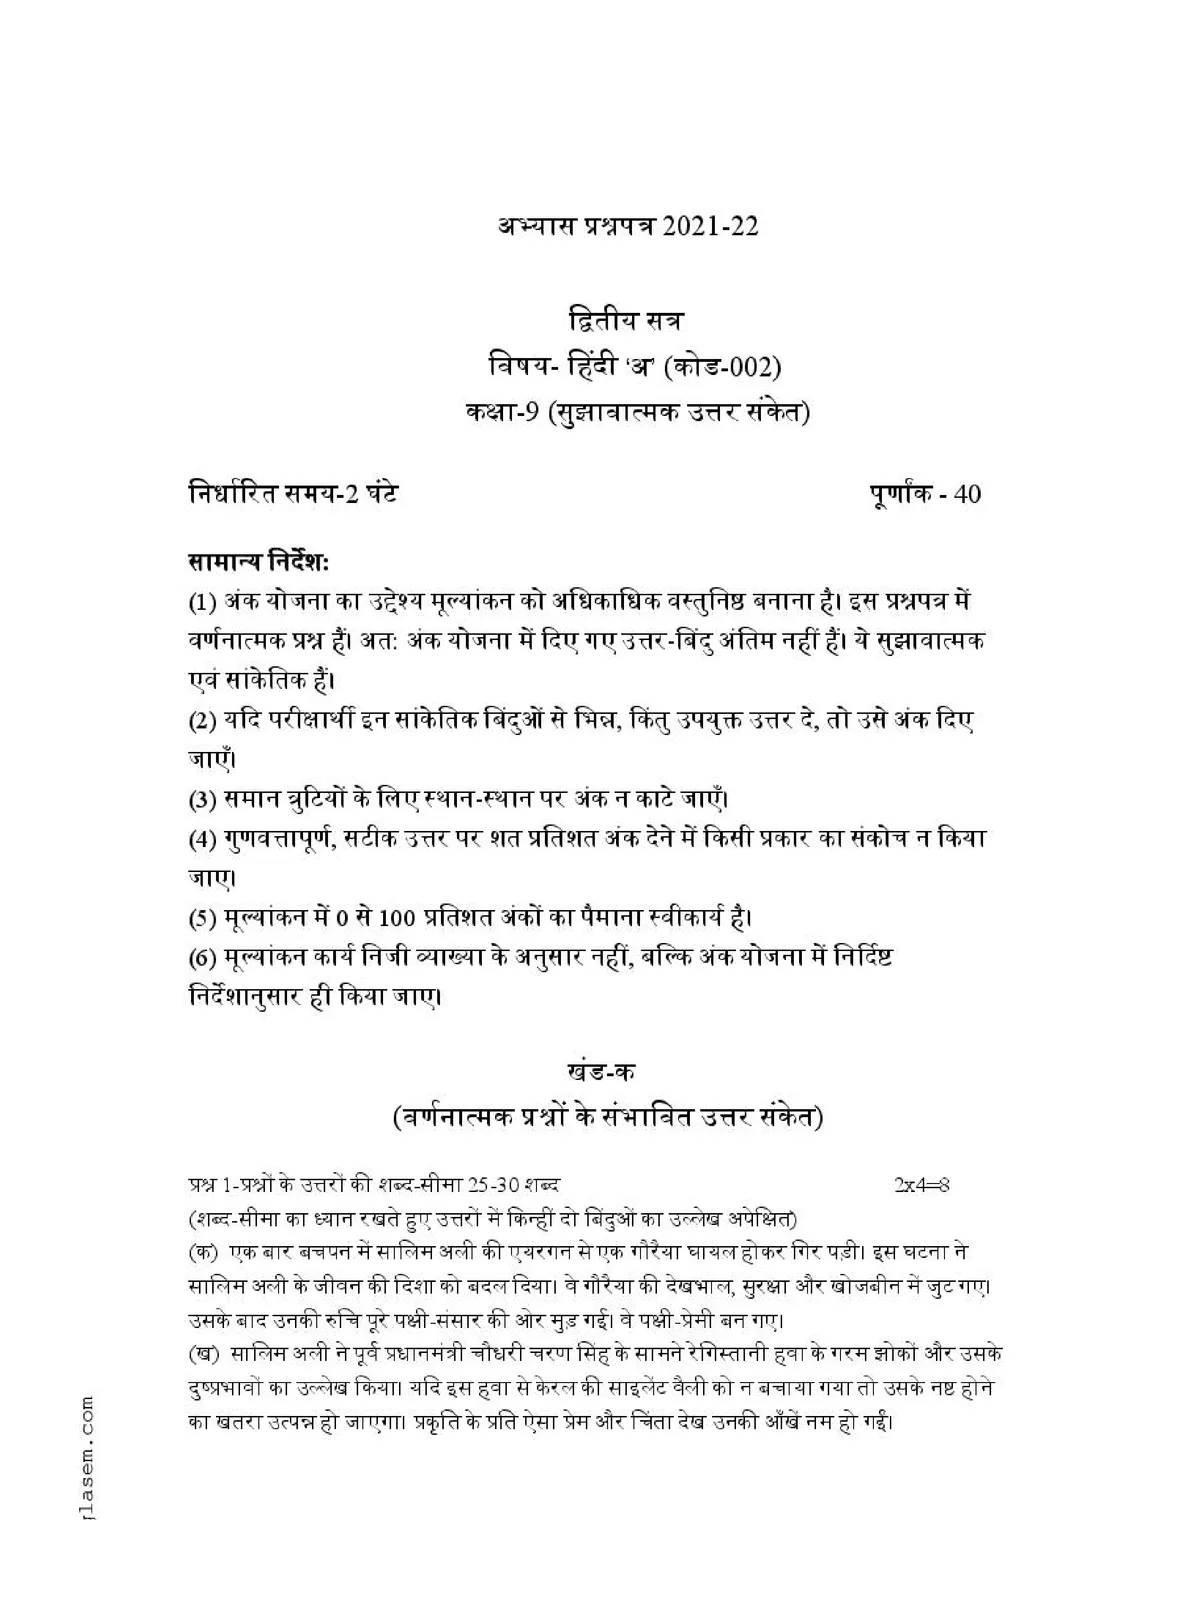 9th Class Hindi Question Paper 2022